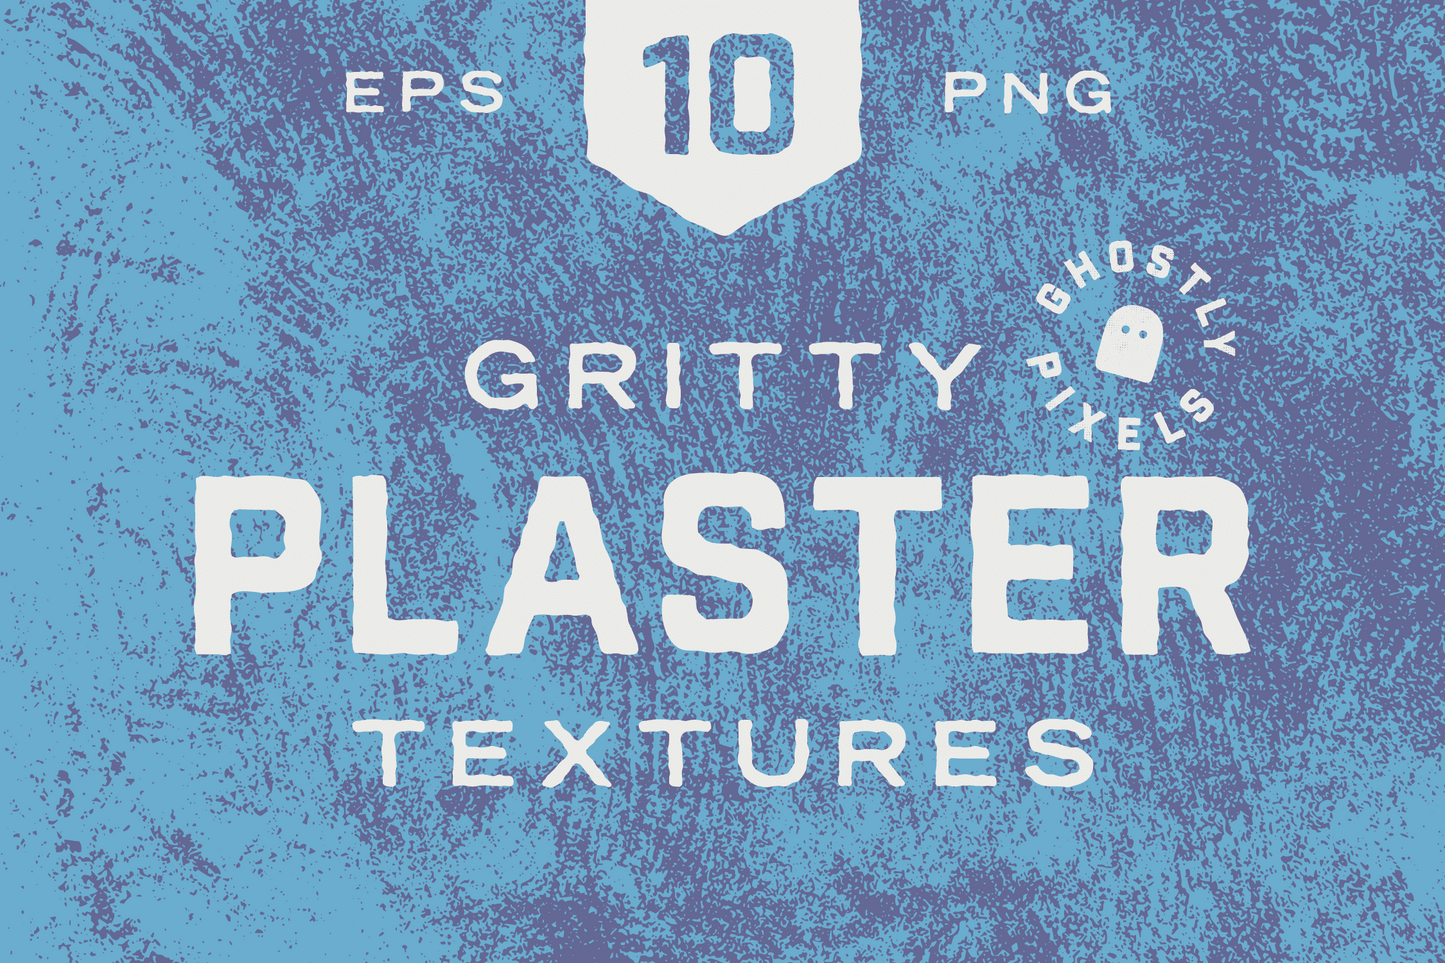 Gritty Plaster Textures